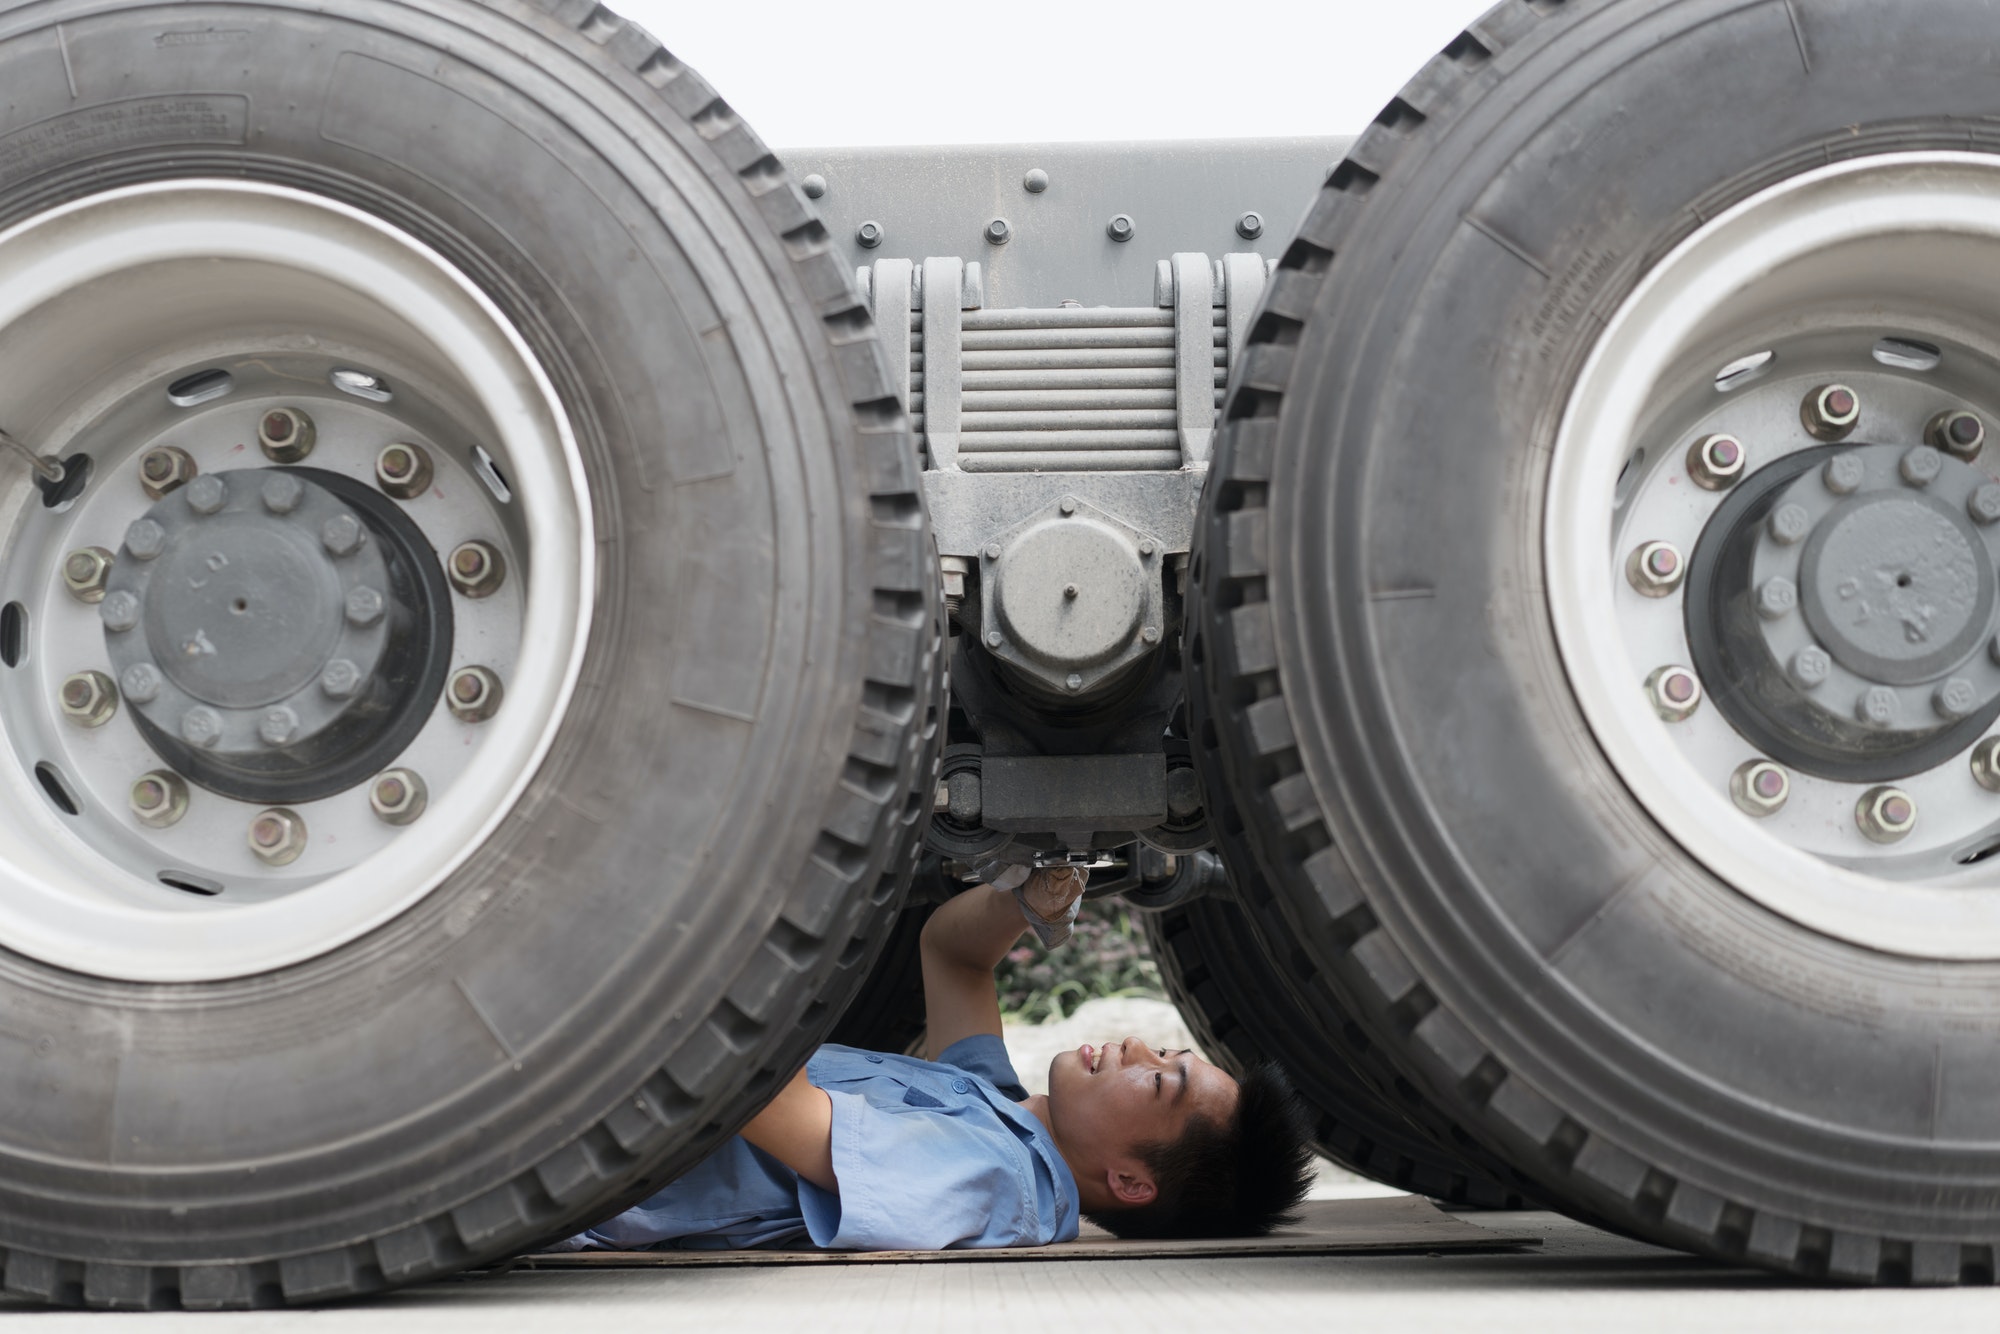 Male factory worker inspecting underneath truck in crane factory, China